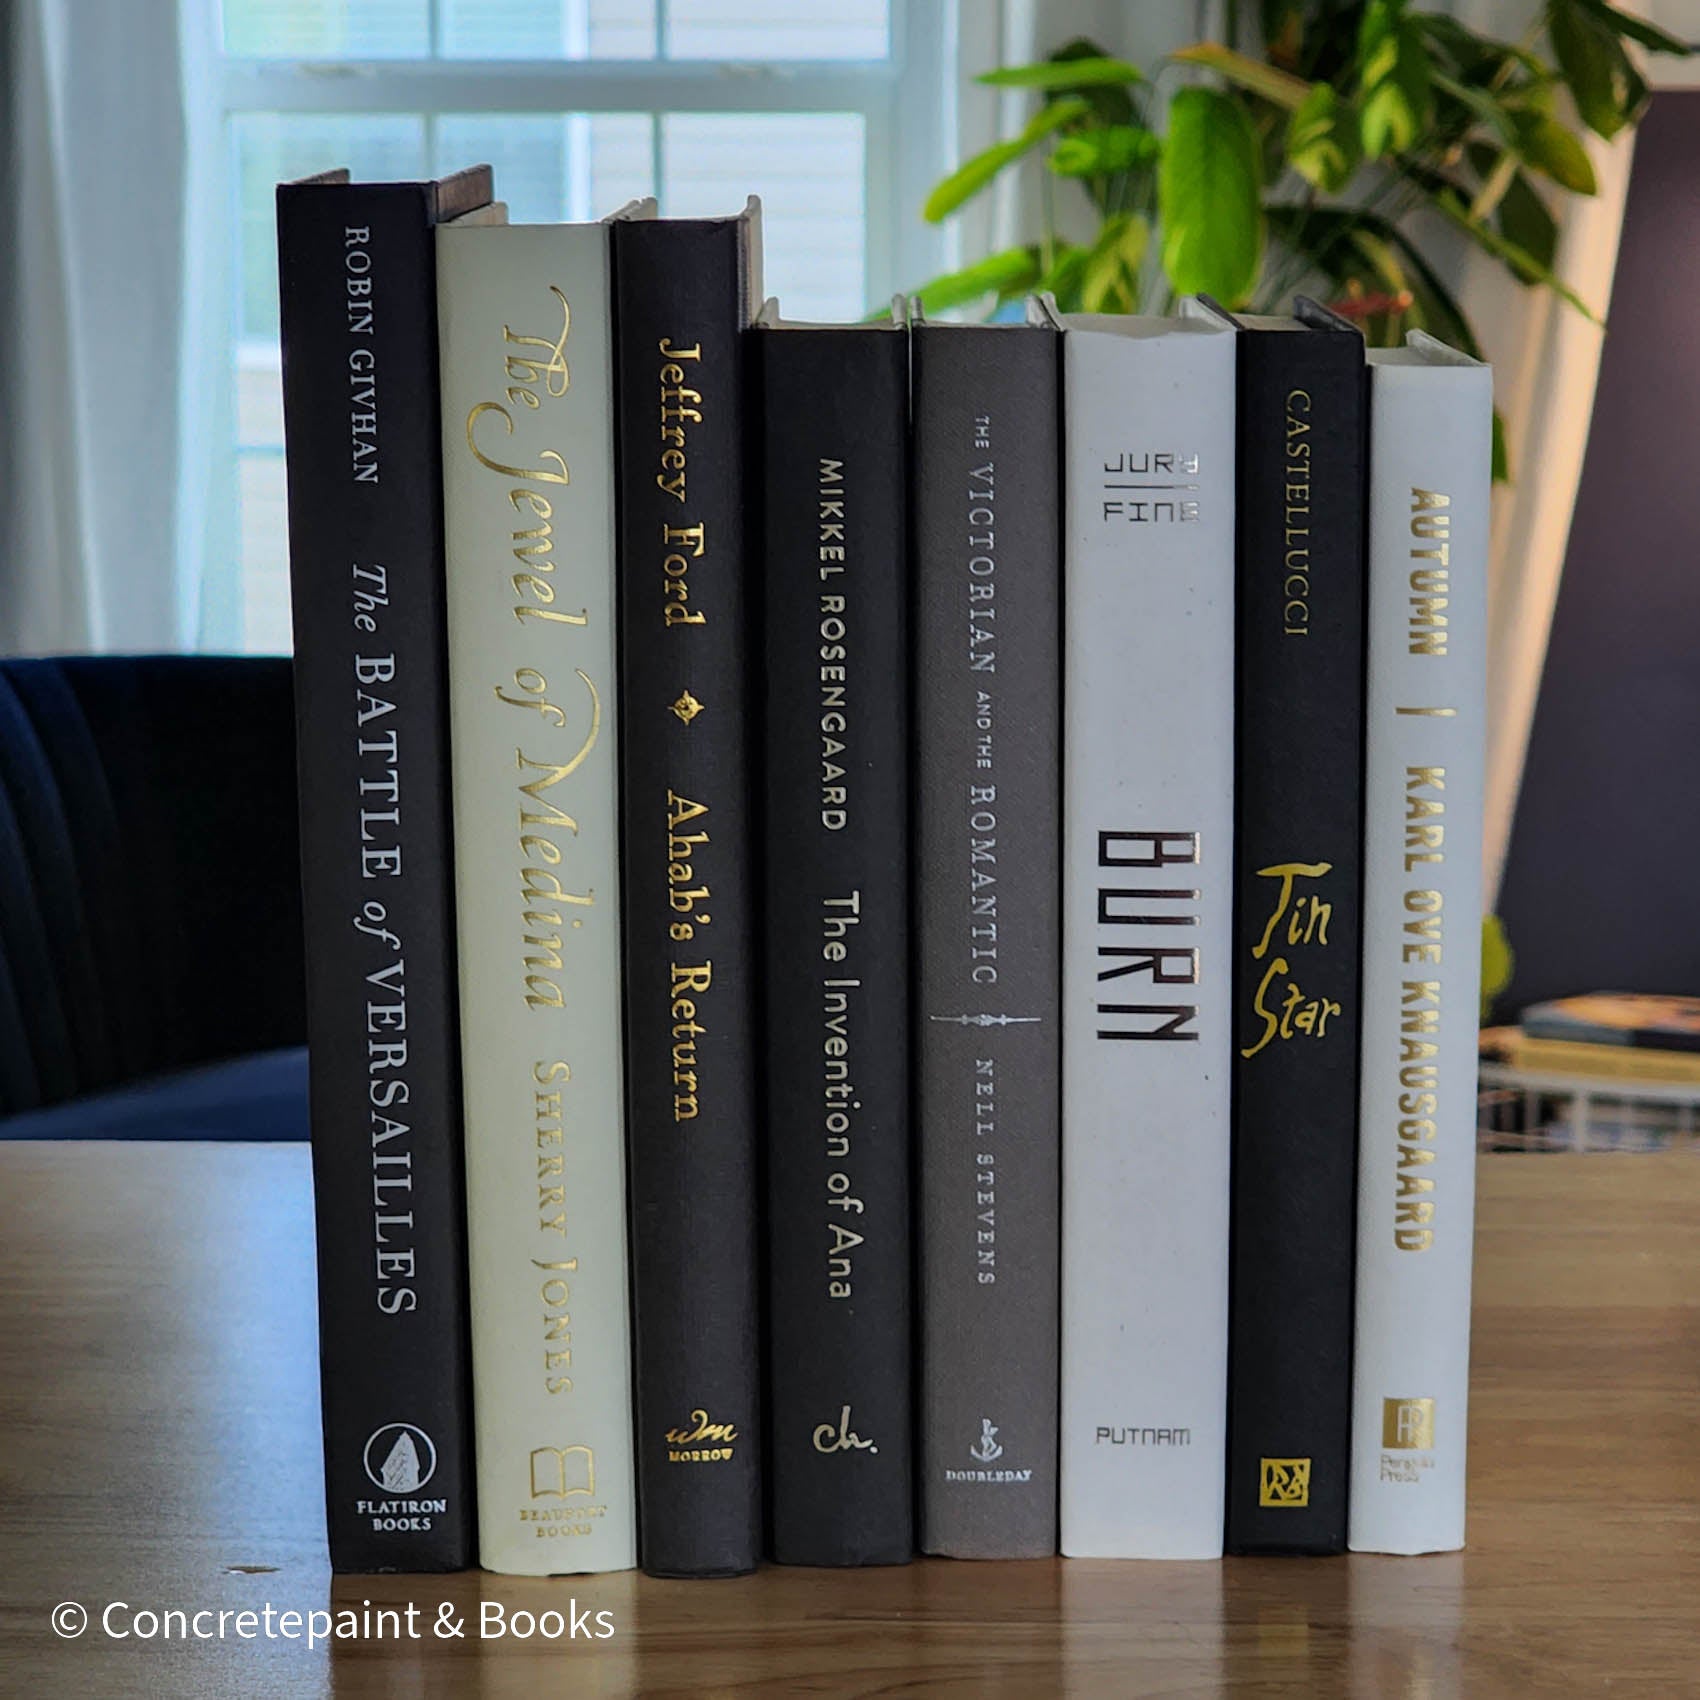 Neutral, black and gray books on display. Real hardcover books for decorating shelves.